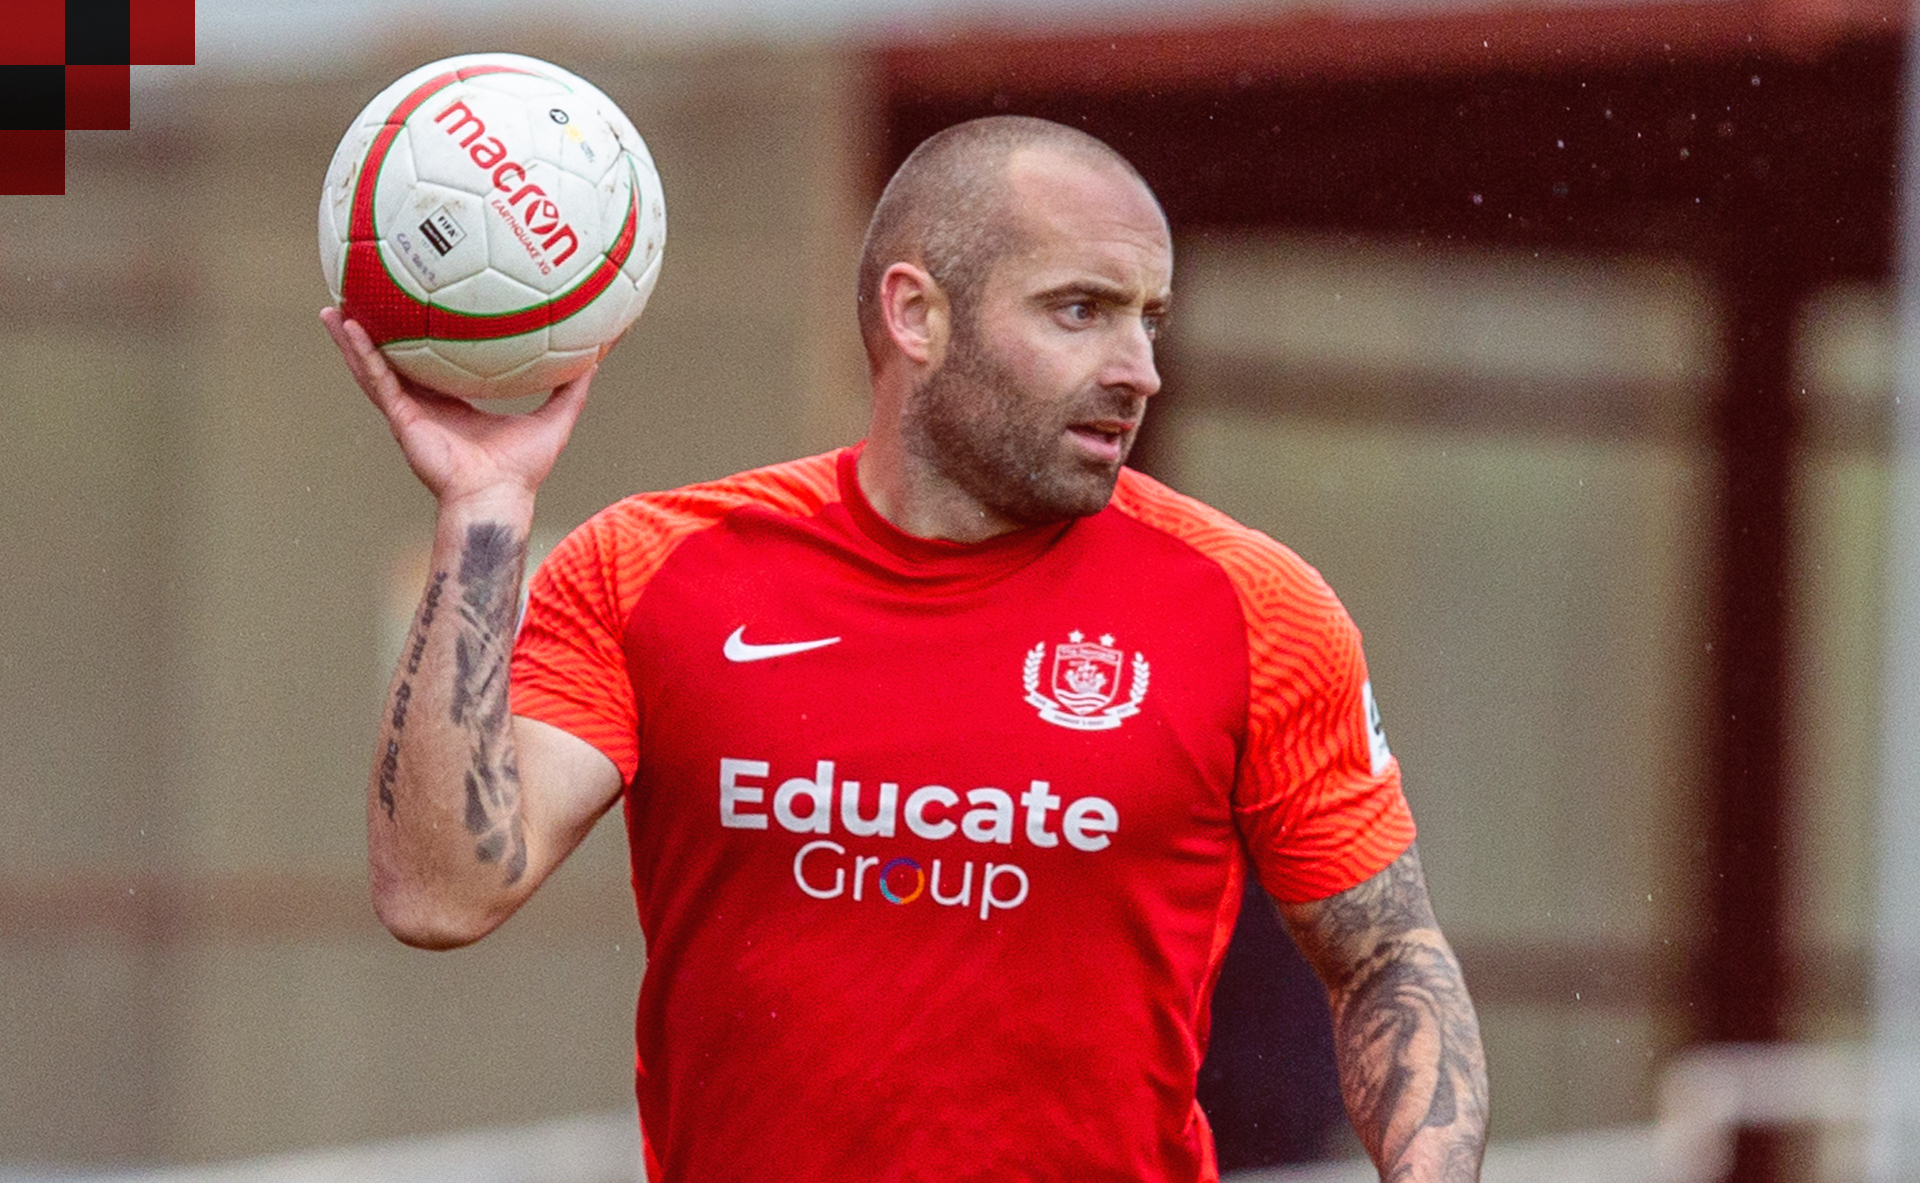 Danny Holmes will join The Nomads' coaching staff